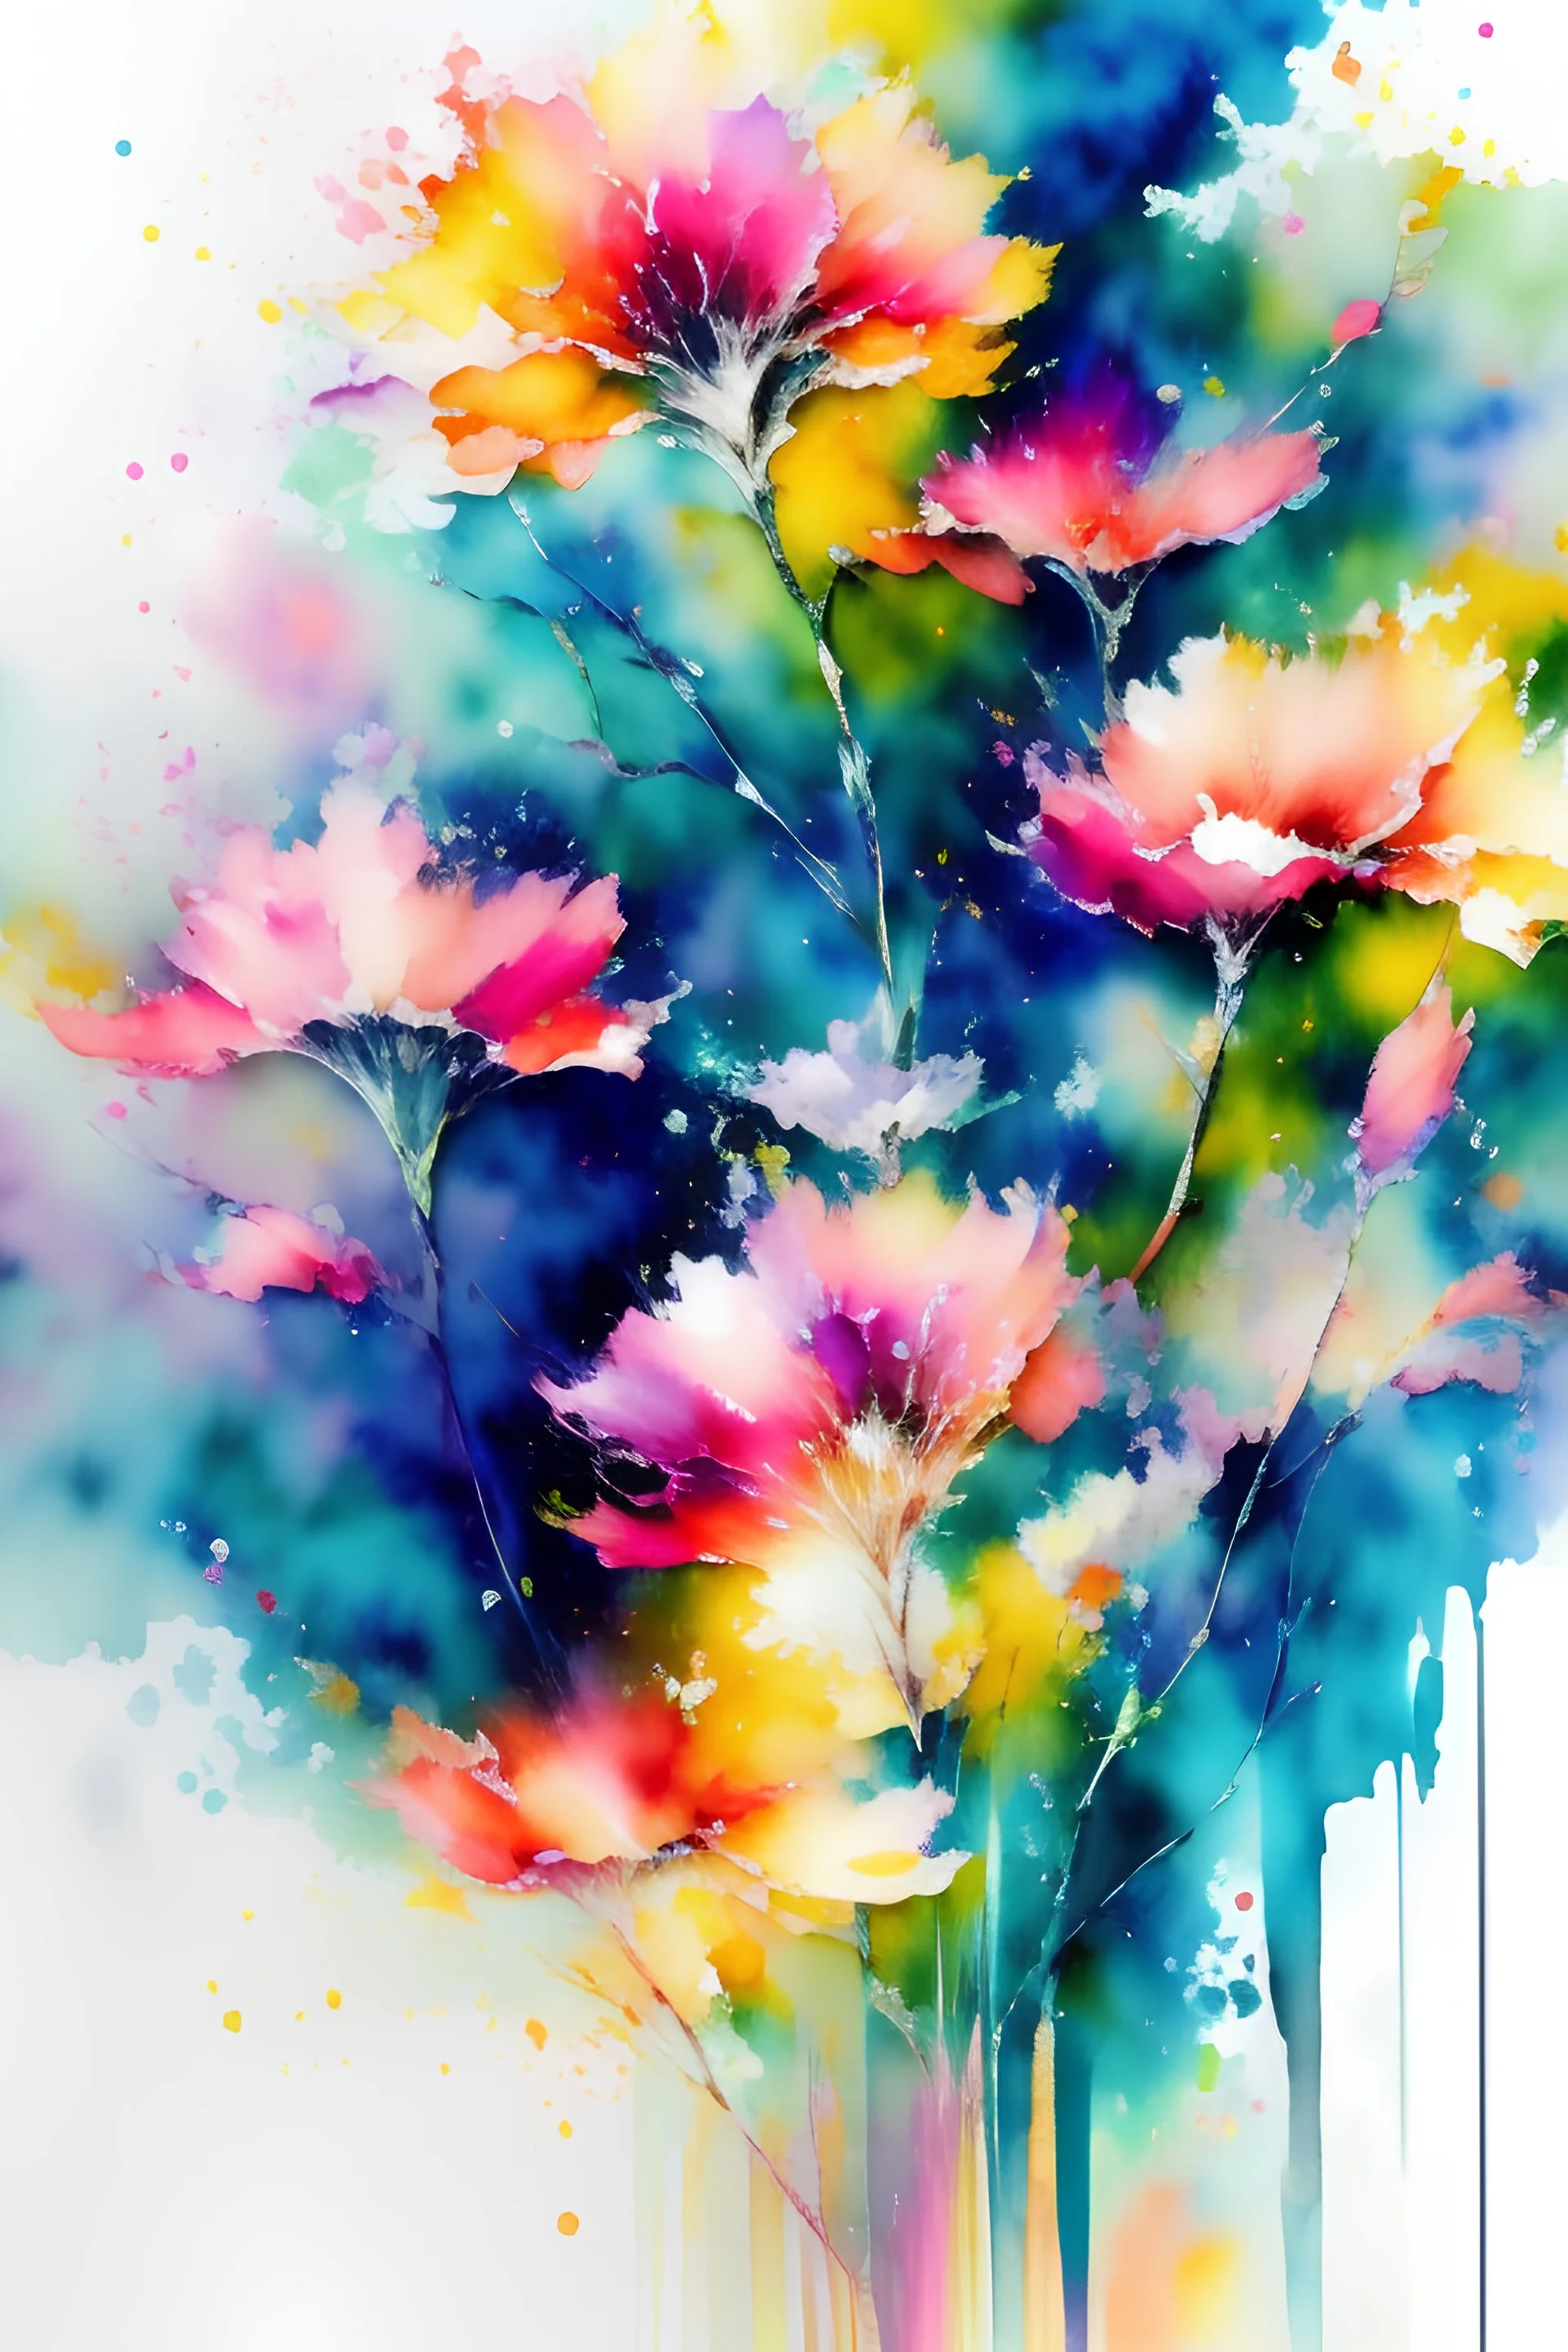 Watercolor, abstract, impressionist, not much detail patterns: Dive into a burst of vibrant colors, resembling an explosion of joy on canvas, with soft edges and a whimsical dance of pigments that invites the viewer to lose themselves in the kaleidoscopic bliss.